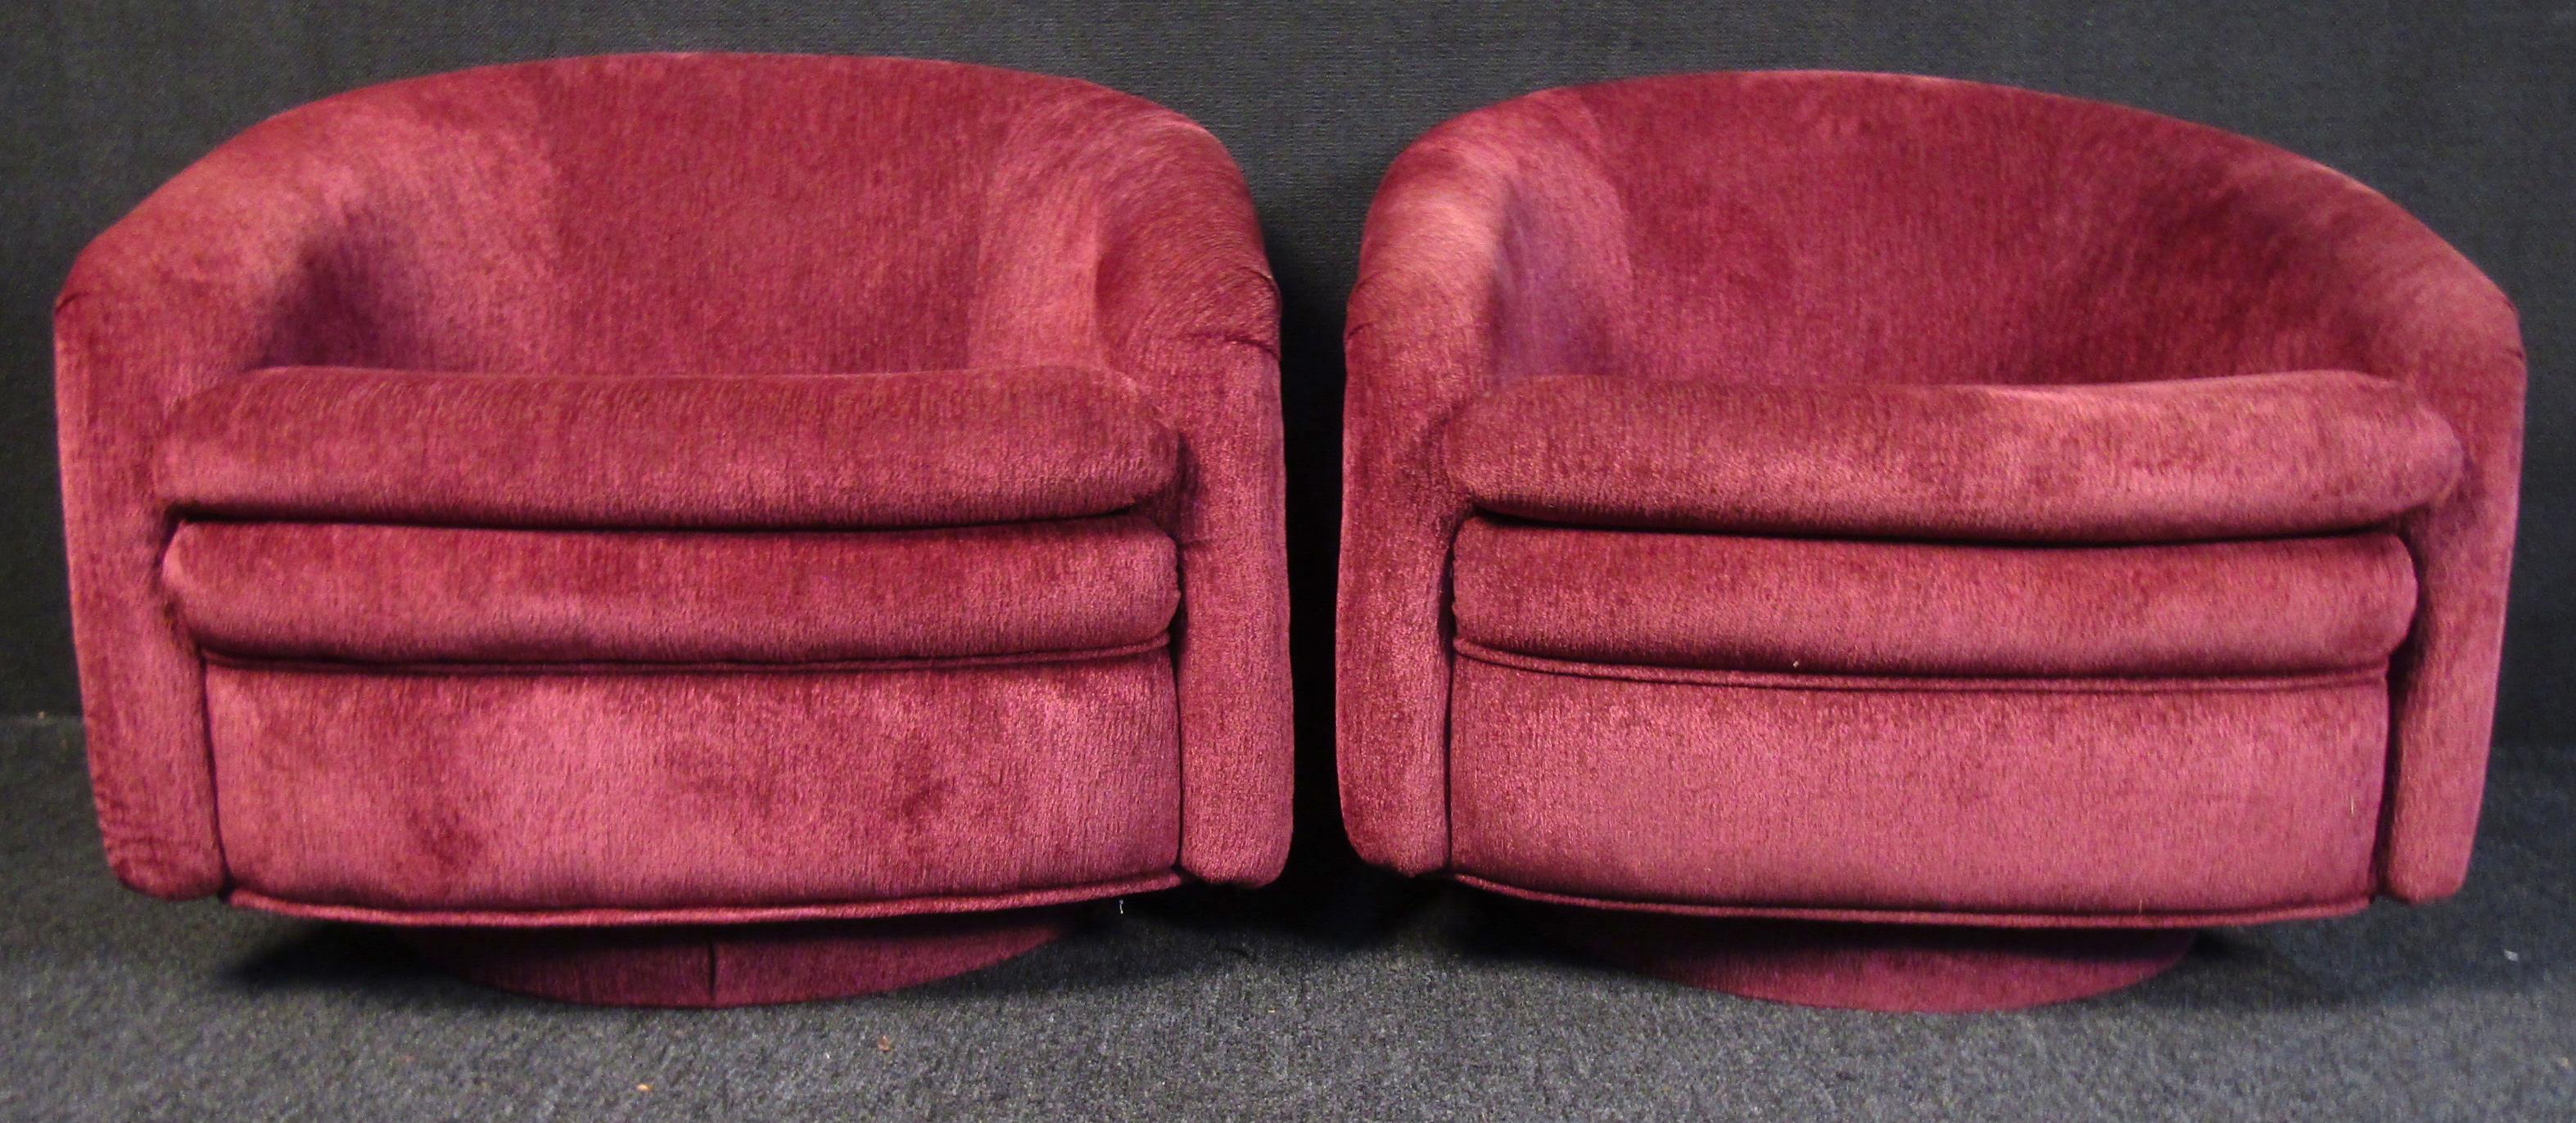 20th Century Mid-Century Modern Maroon Swivel Lounge Chairs For Sale